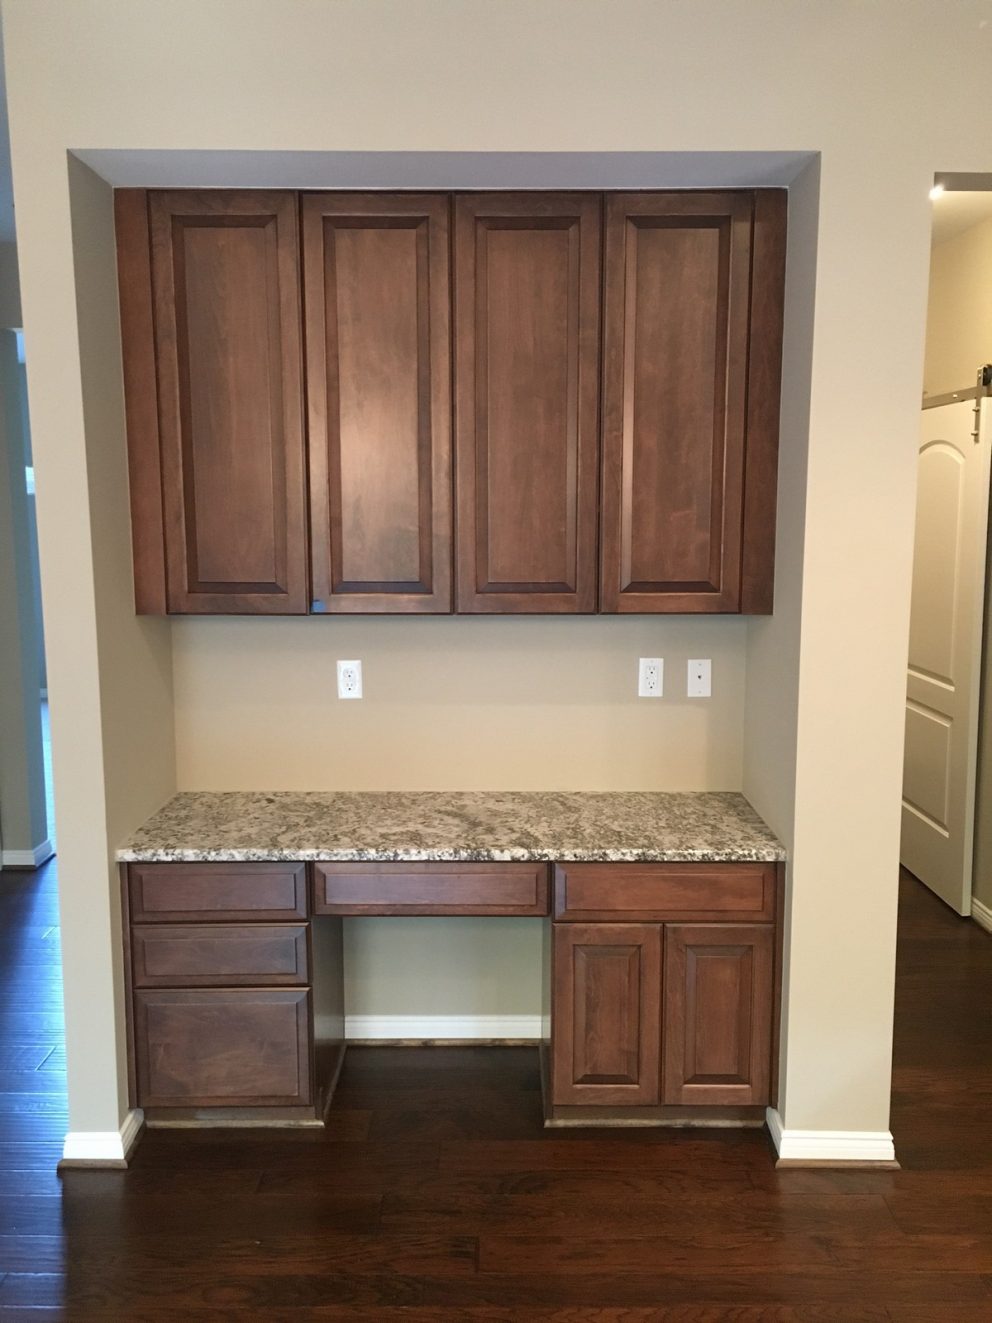 Desk area with additional kitchen cabinetry